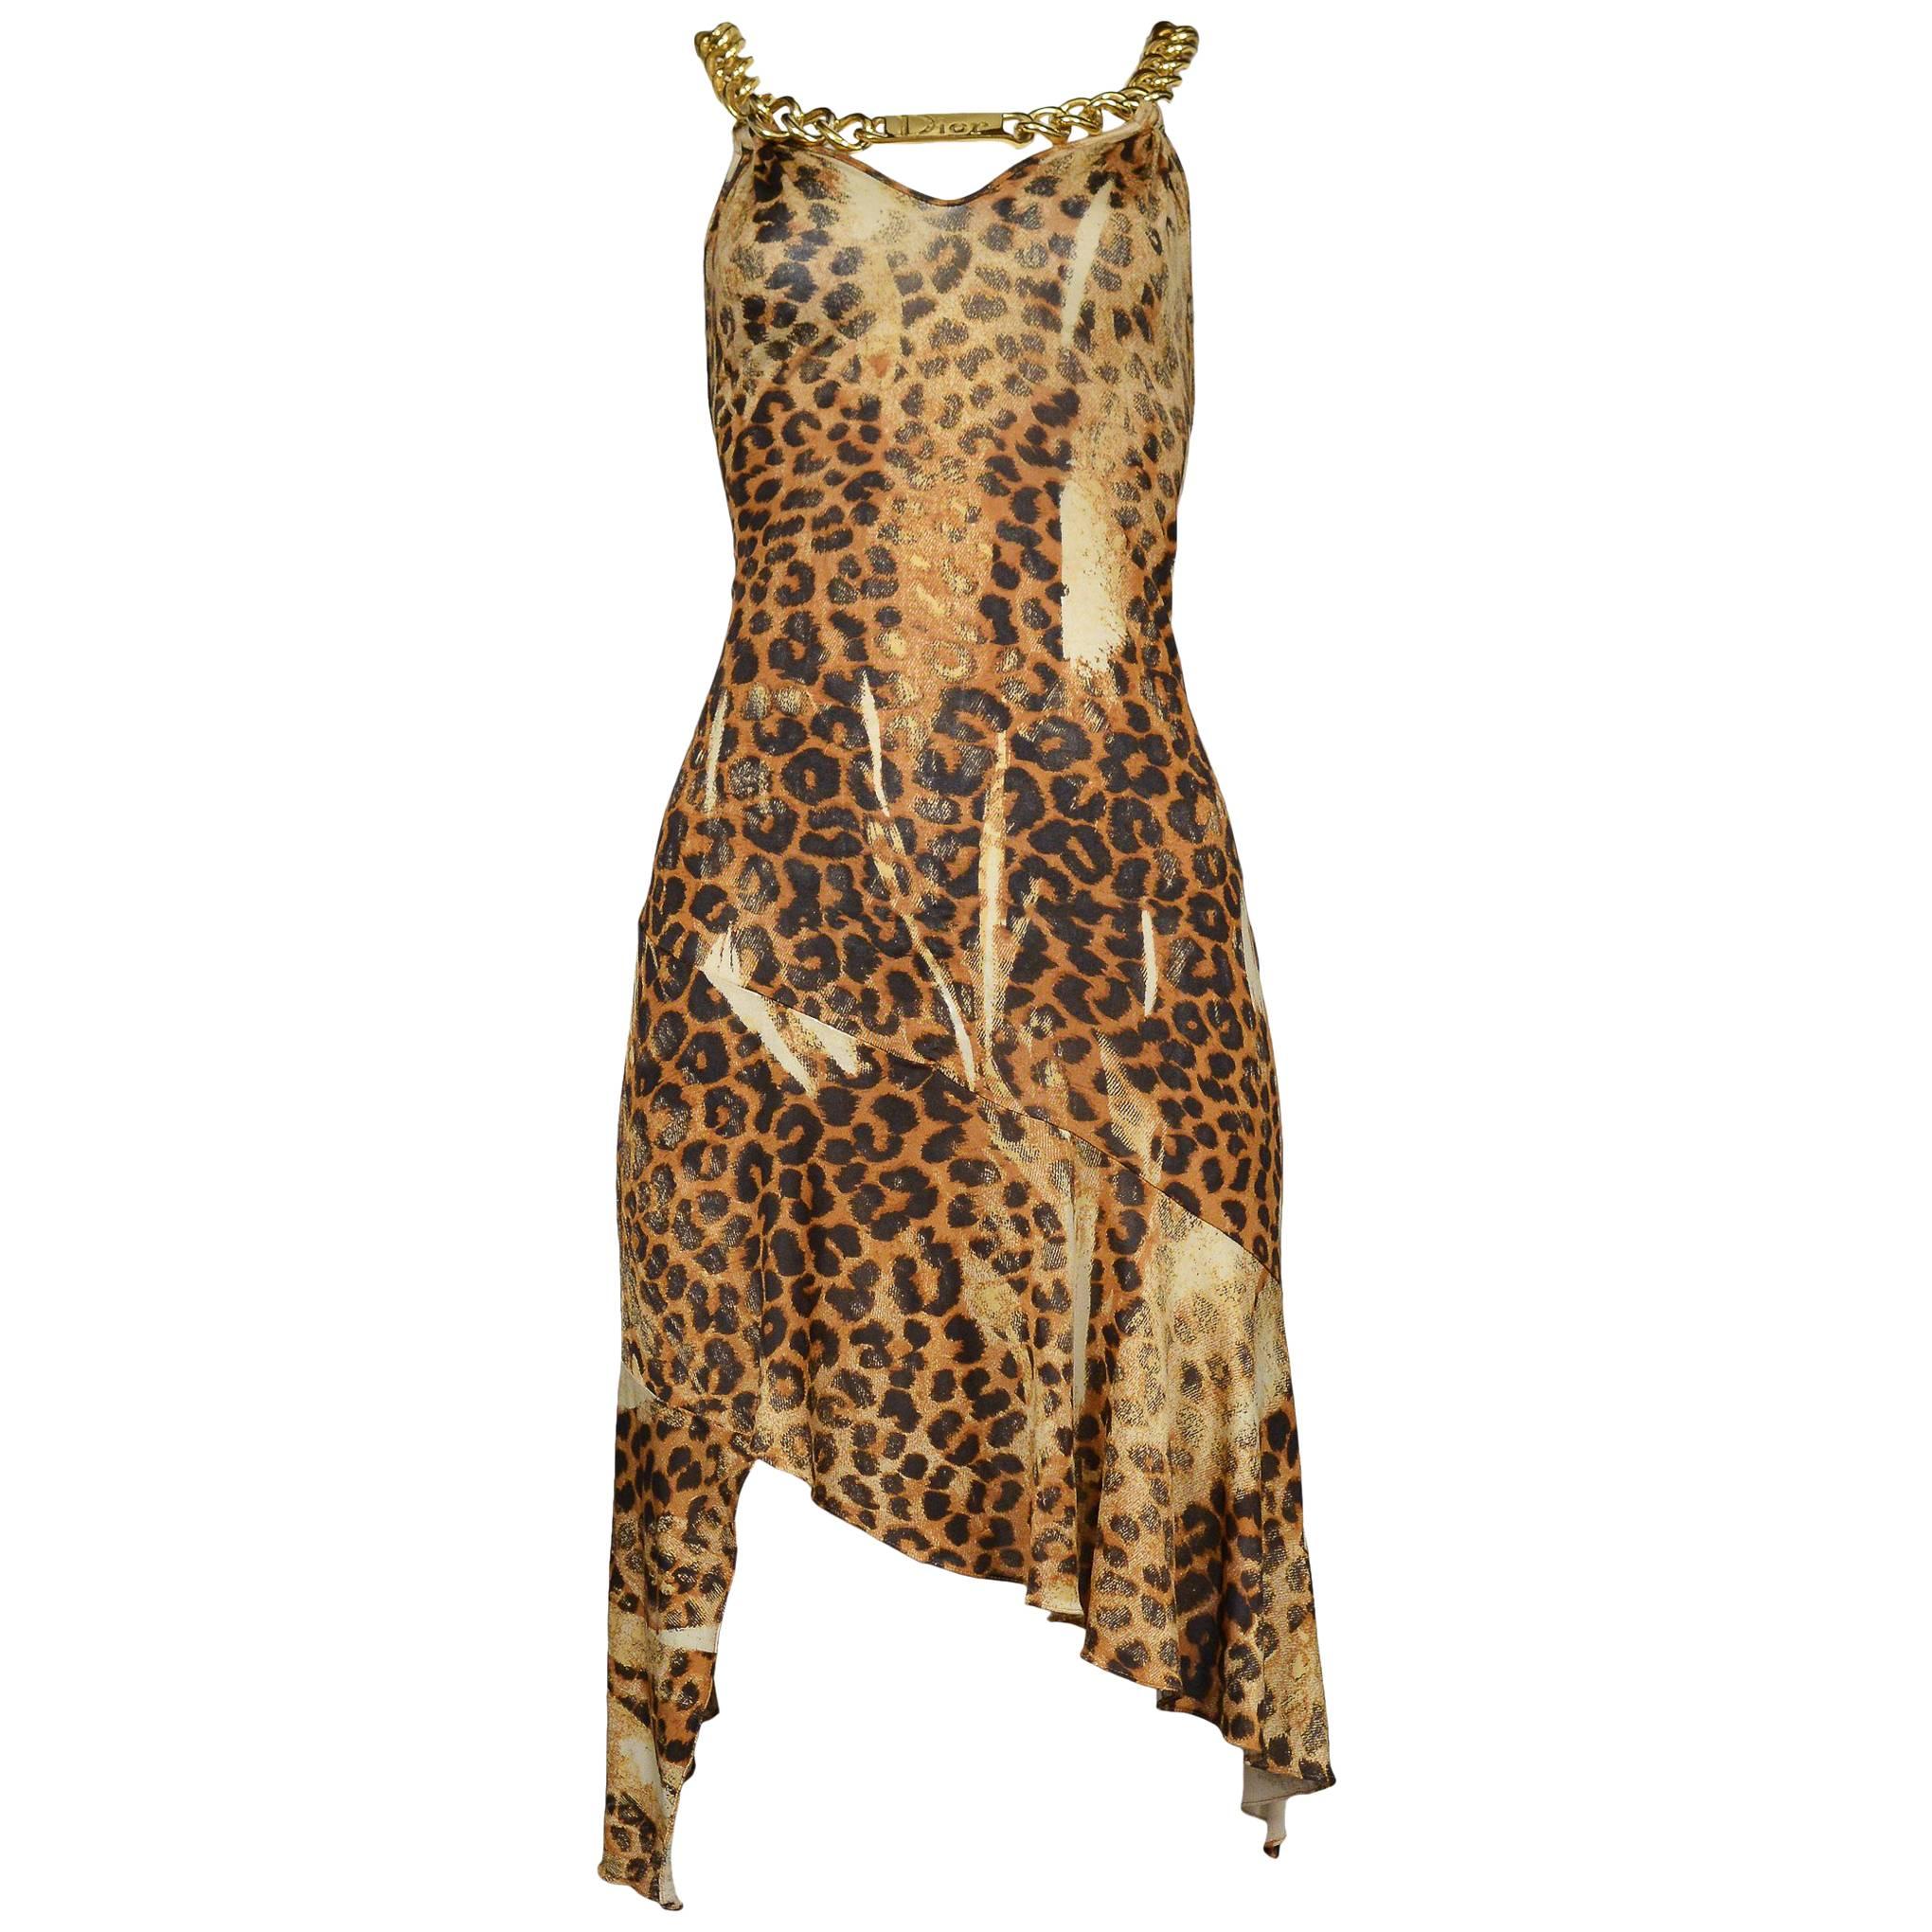 Iconic Dior By Galliano Gold Chain & ID Logo Necklace Leopard Dress Runway 2000